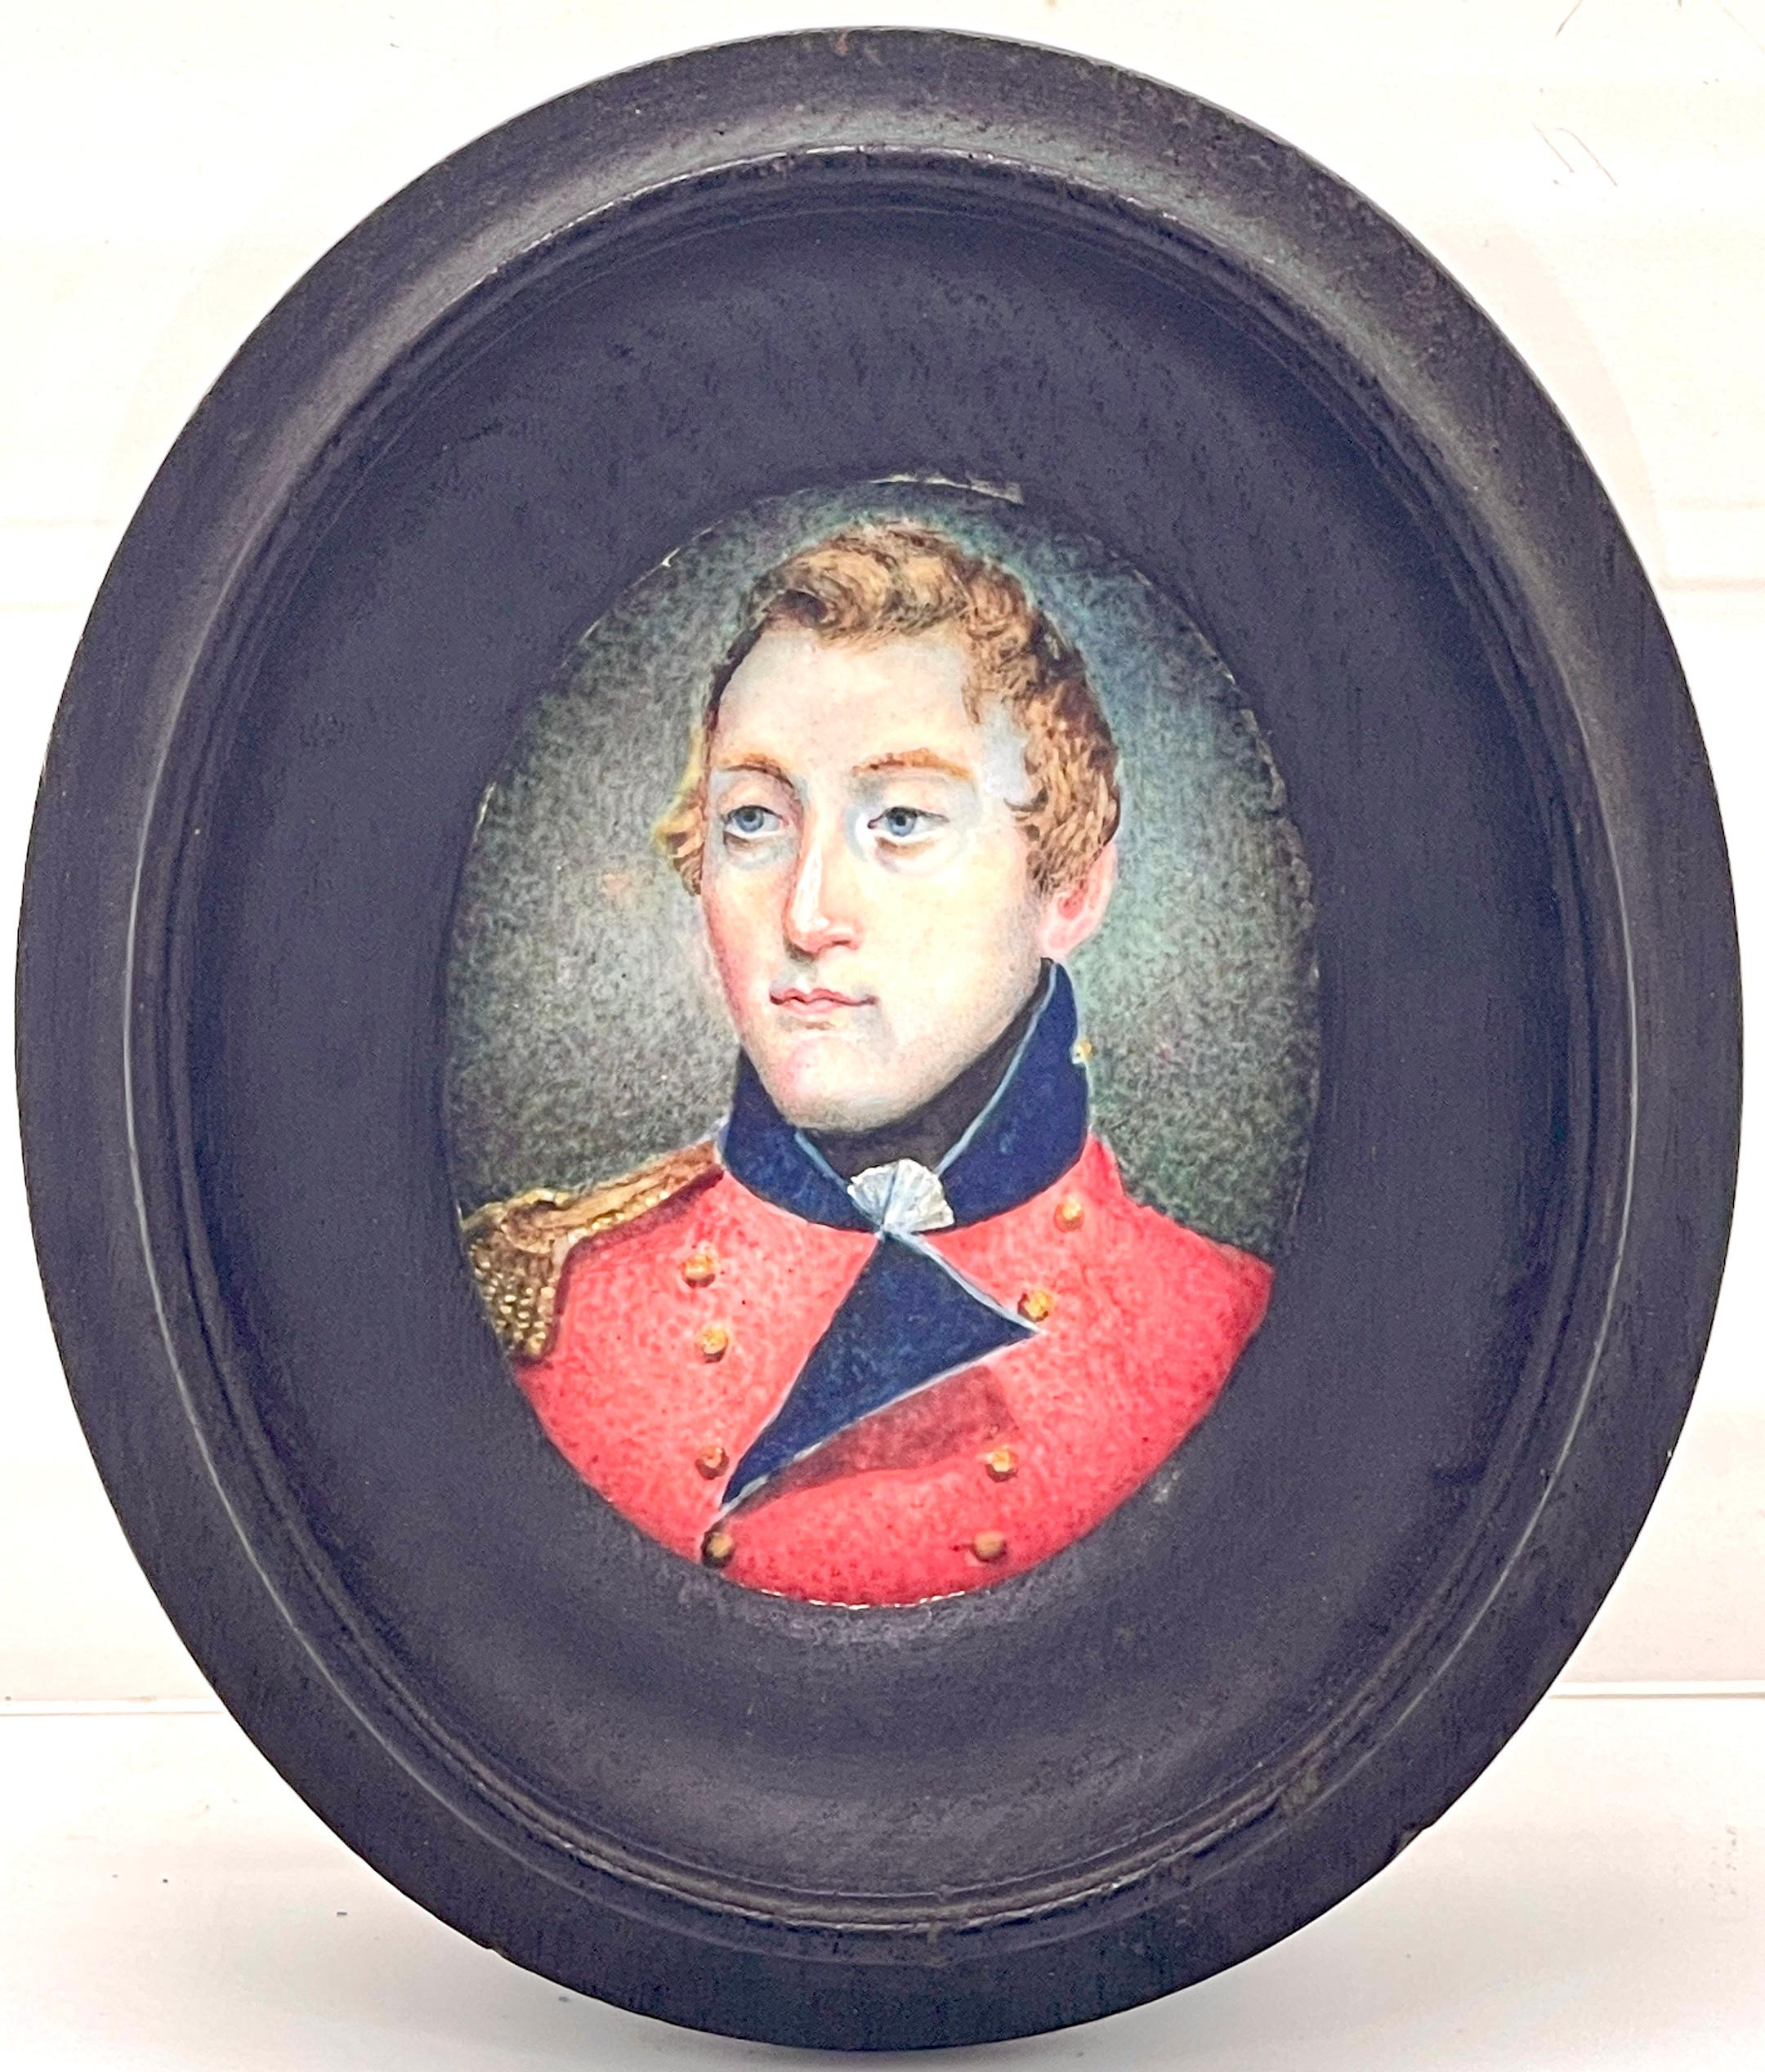 Lt. Col. Robert Stewart, Miniature Portrait C. 1763, French and Indian War 
Lieutenant Colonel Robert Stewart (1729–1809) of the Virginia Regiment
Labeled on the back:: Lieutennip? Fitis ‘ie’? Ne Militia 

A remarkable piece of history is